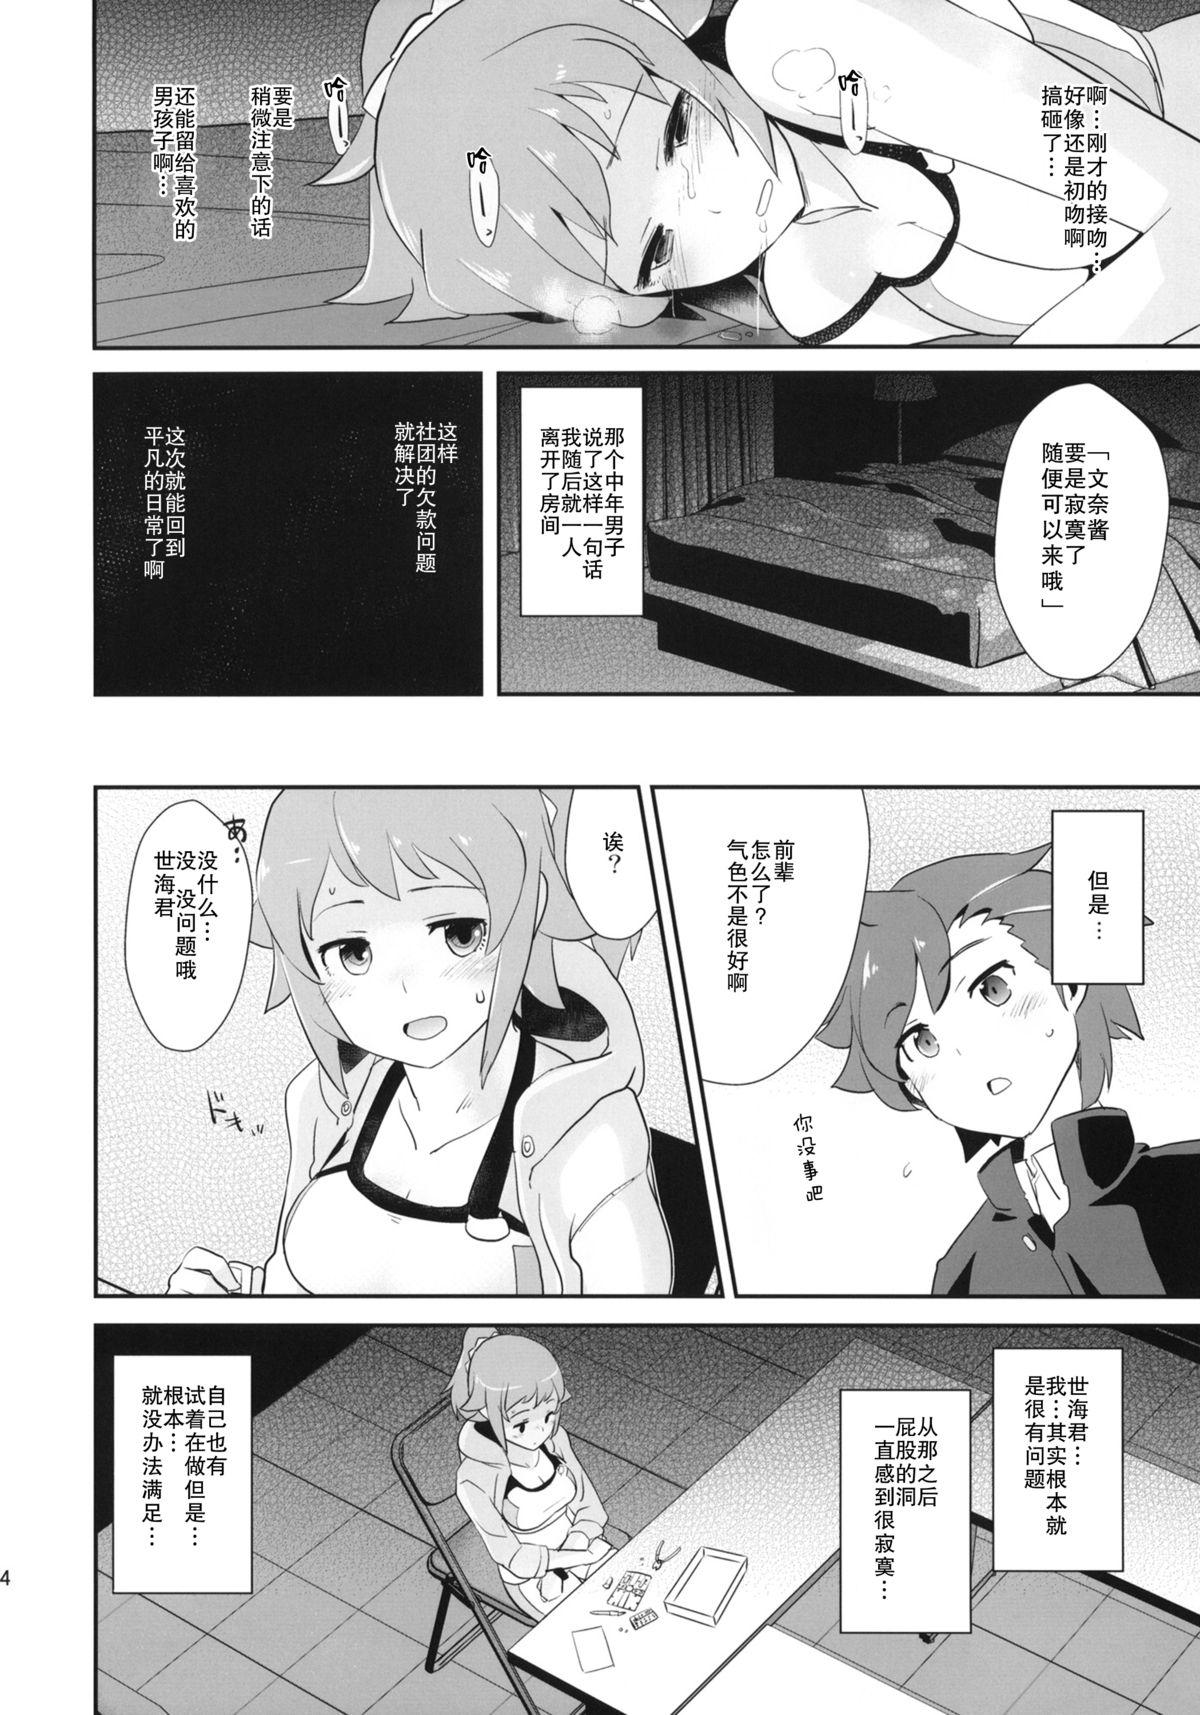 Speculum Omanko Damedesu. - Gundam build fighters try Family Roleplay - Page 23